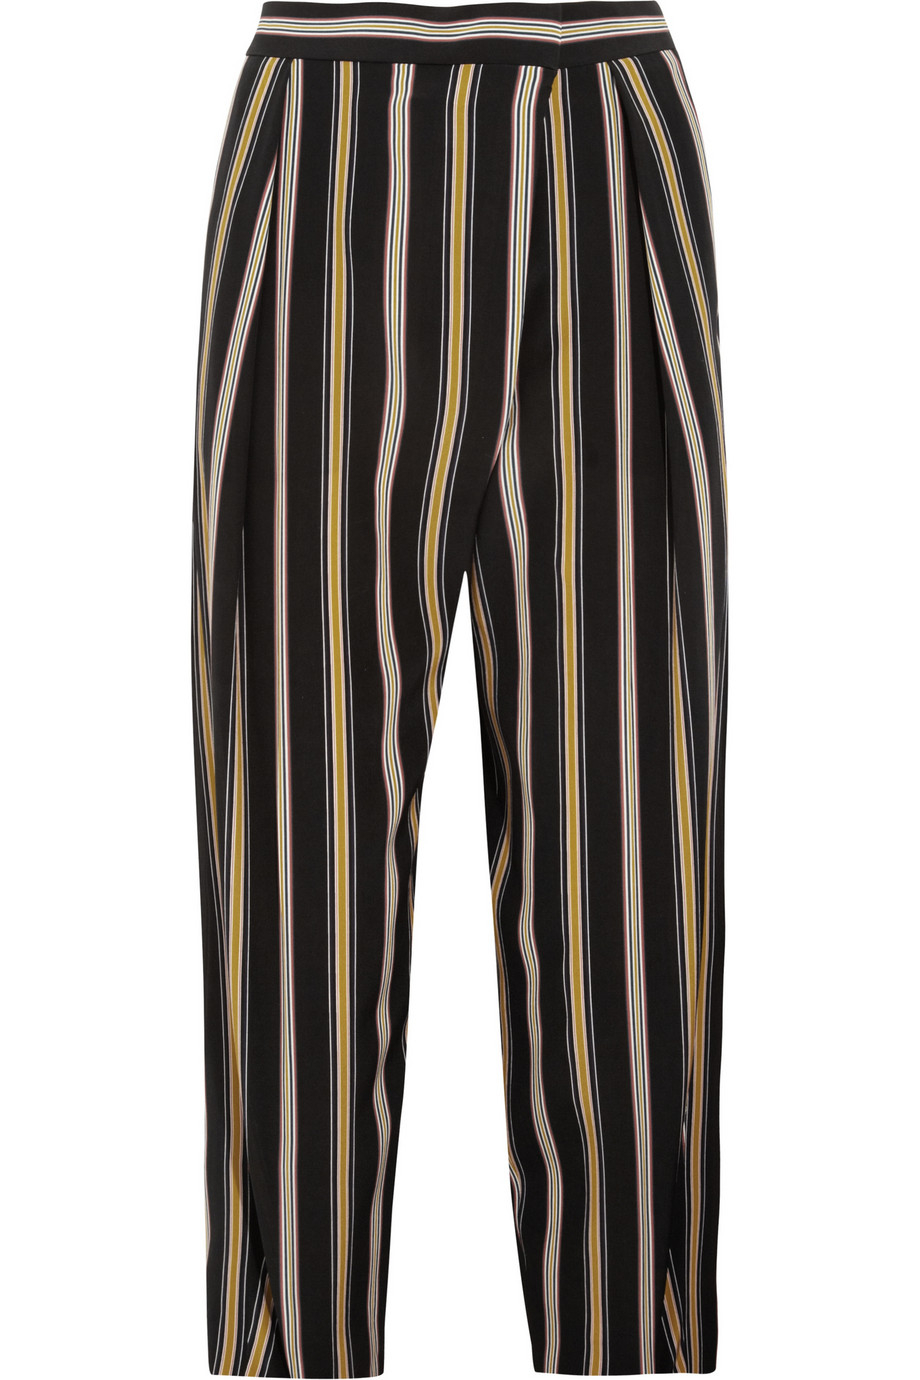 Lyst - Chloé Striped Cropped Silk Pants in Blue